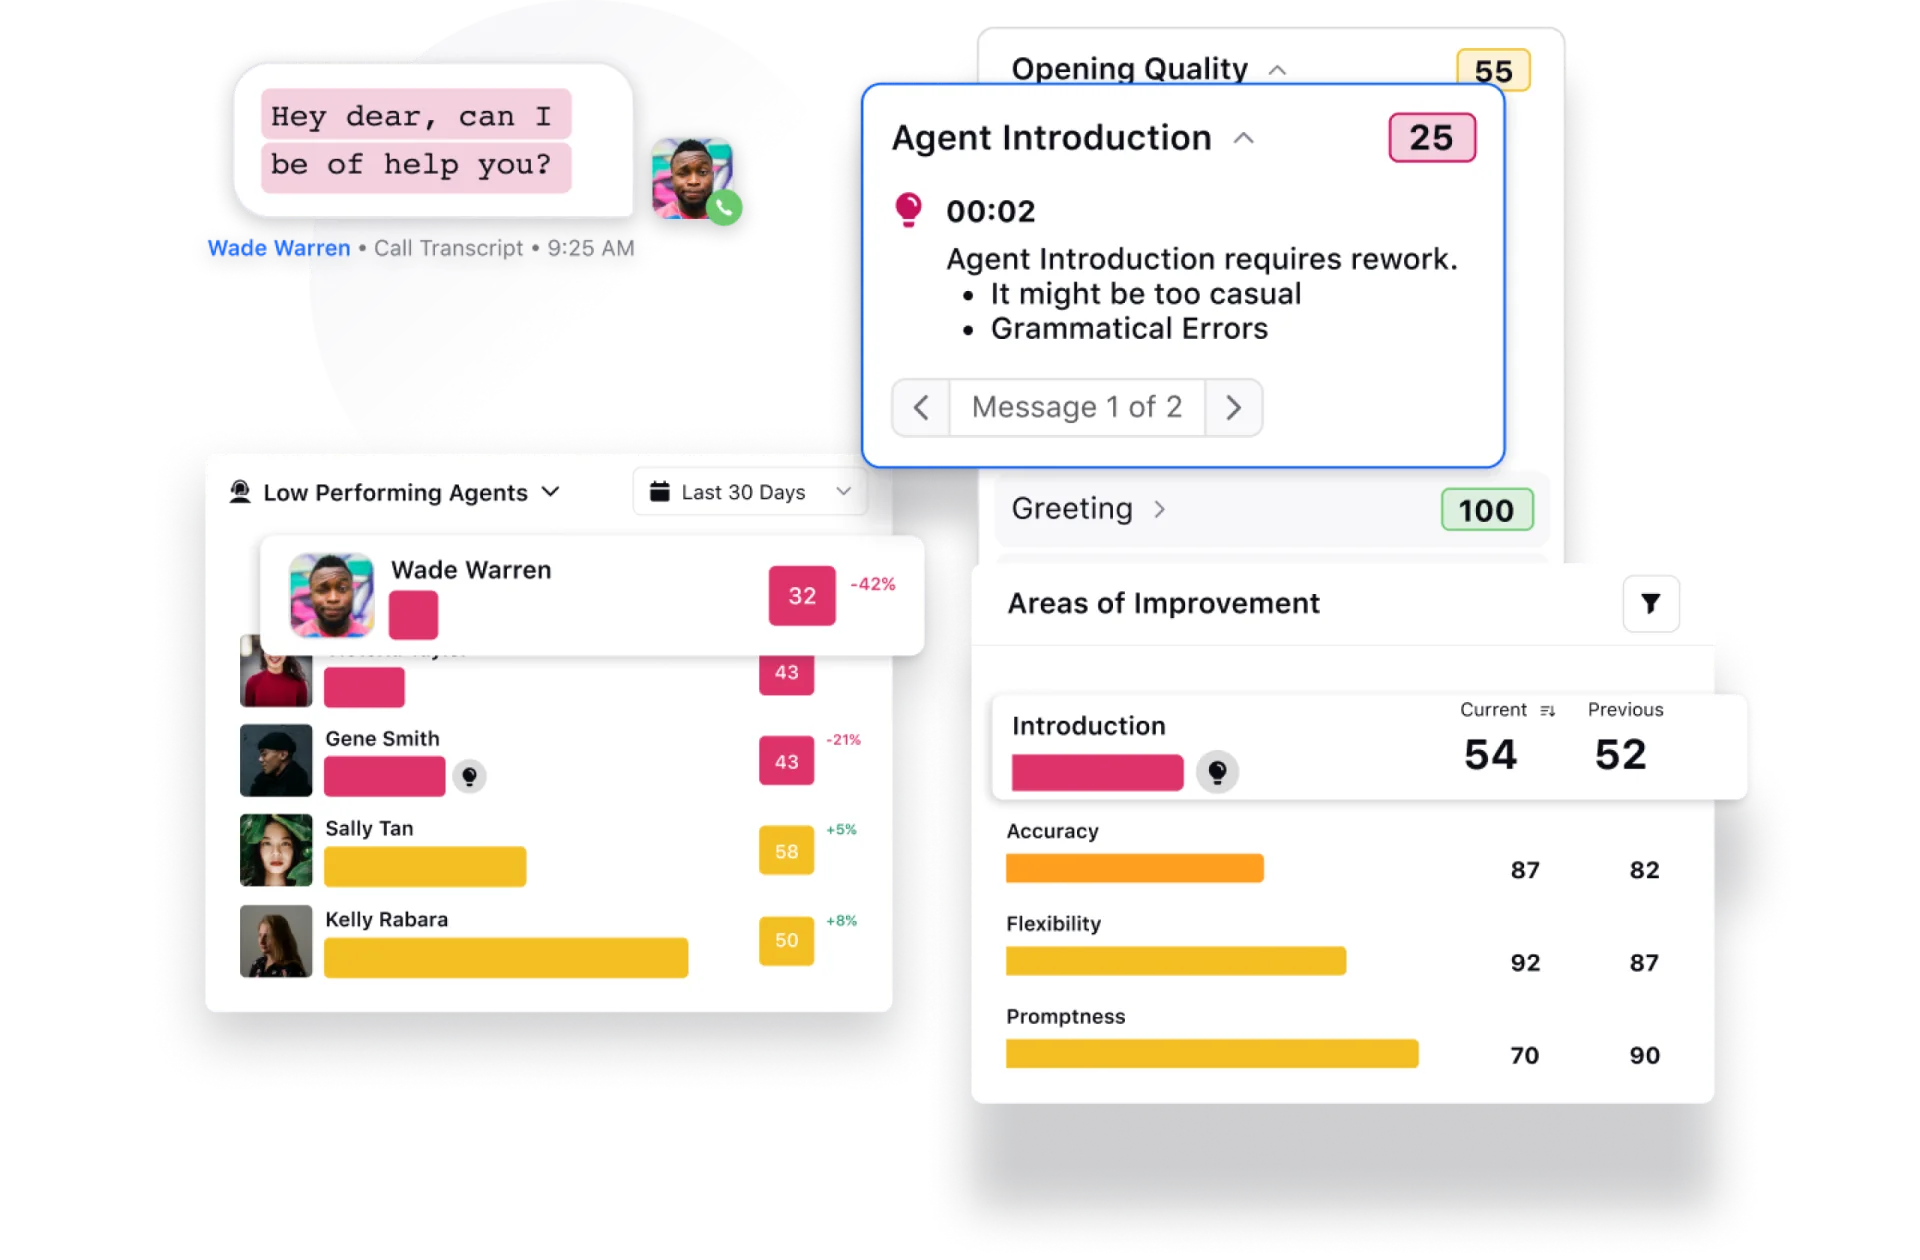 Agent performance monitoring with automated scoring using Sprinklr Quality Management Software